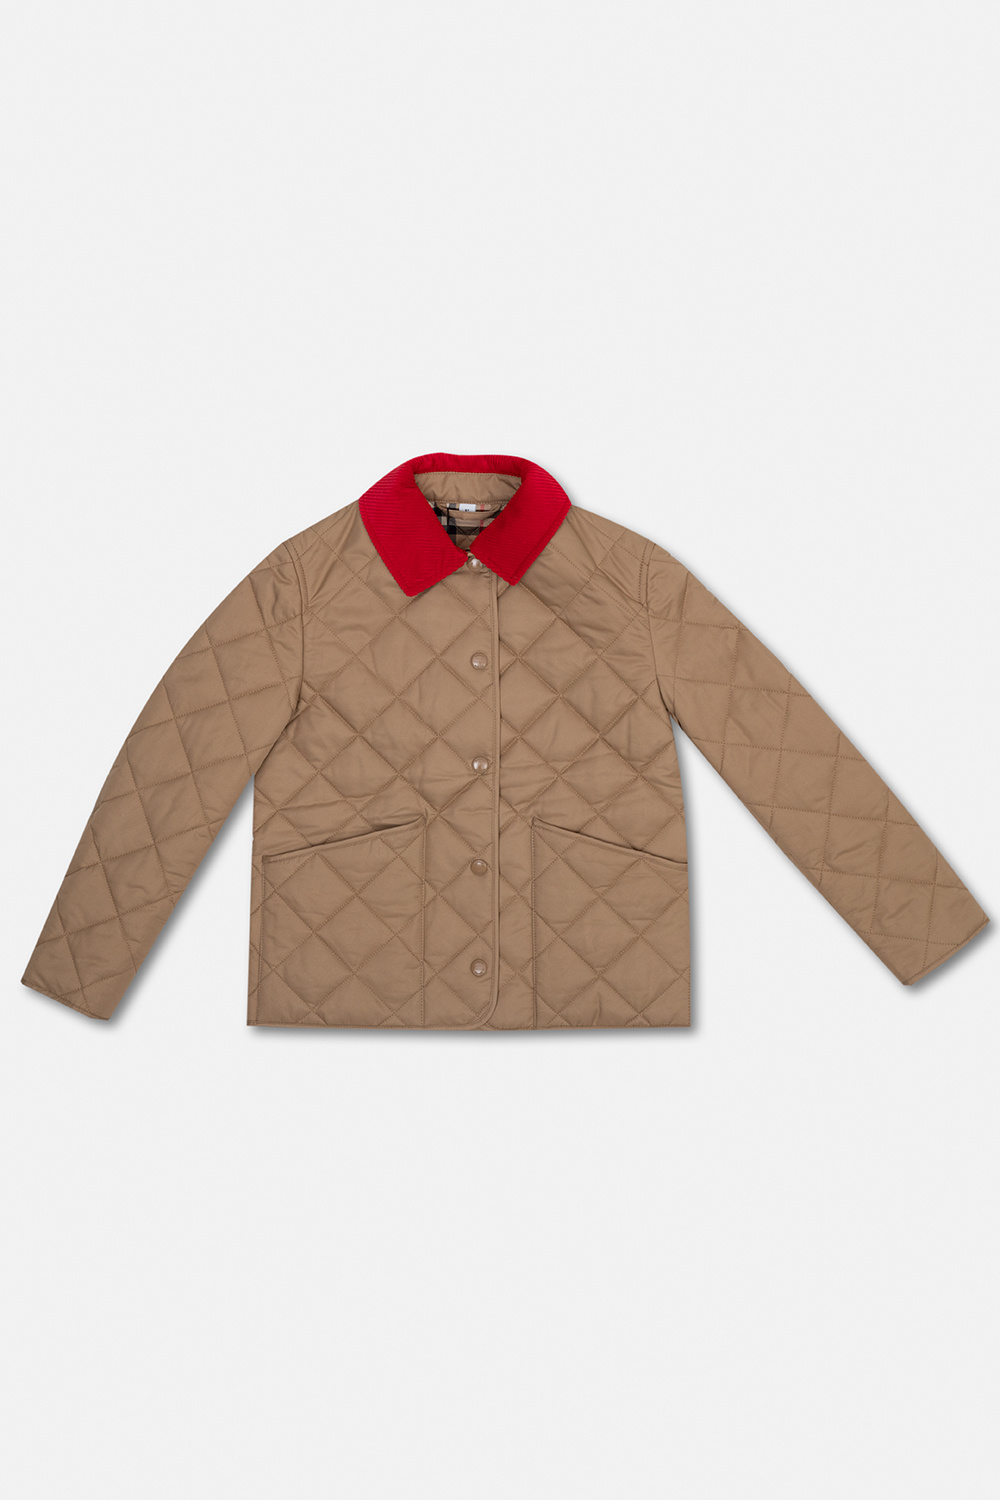 burberry cap Kids ‘Daley’ quilted jacket